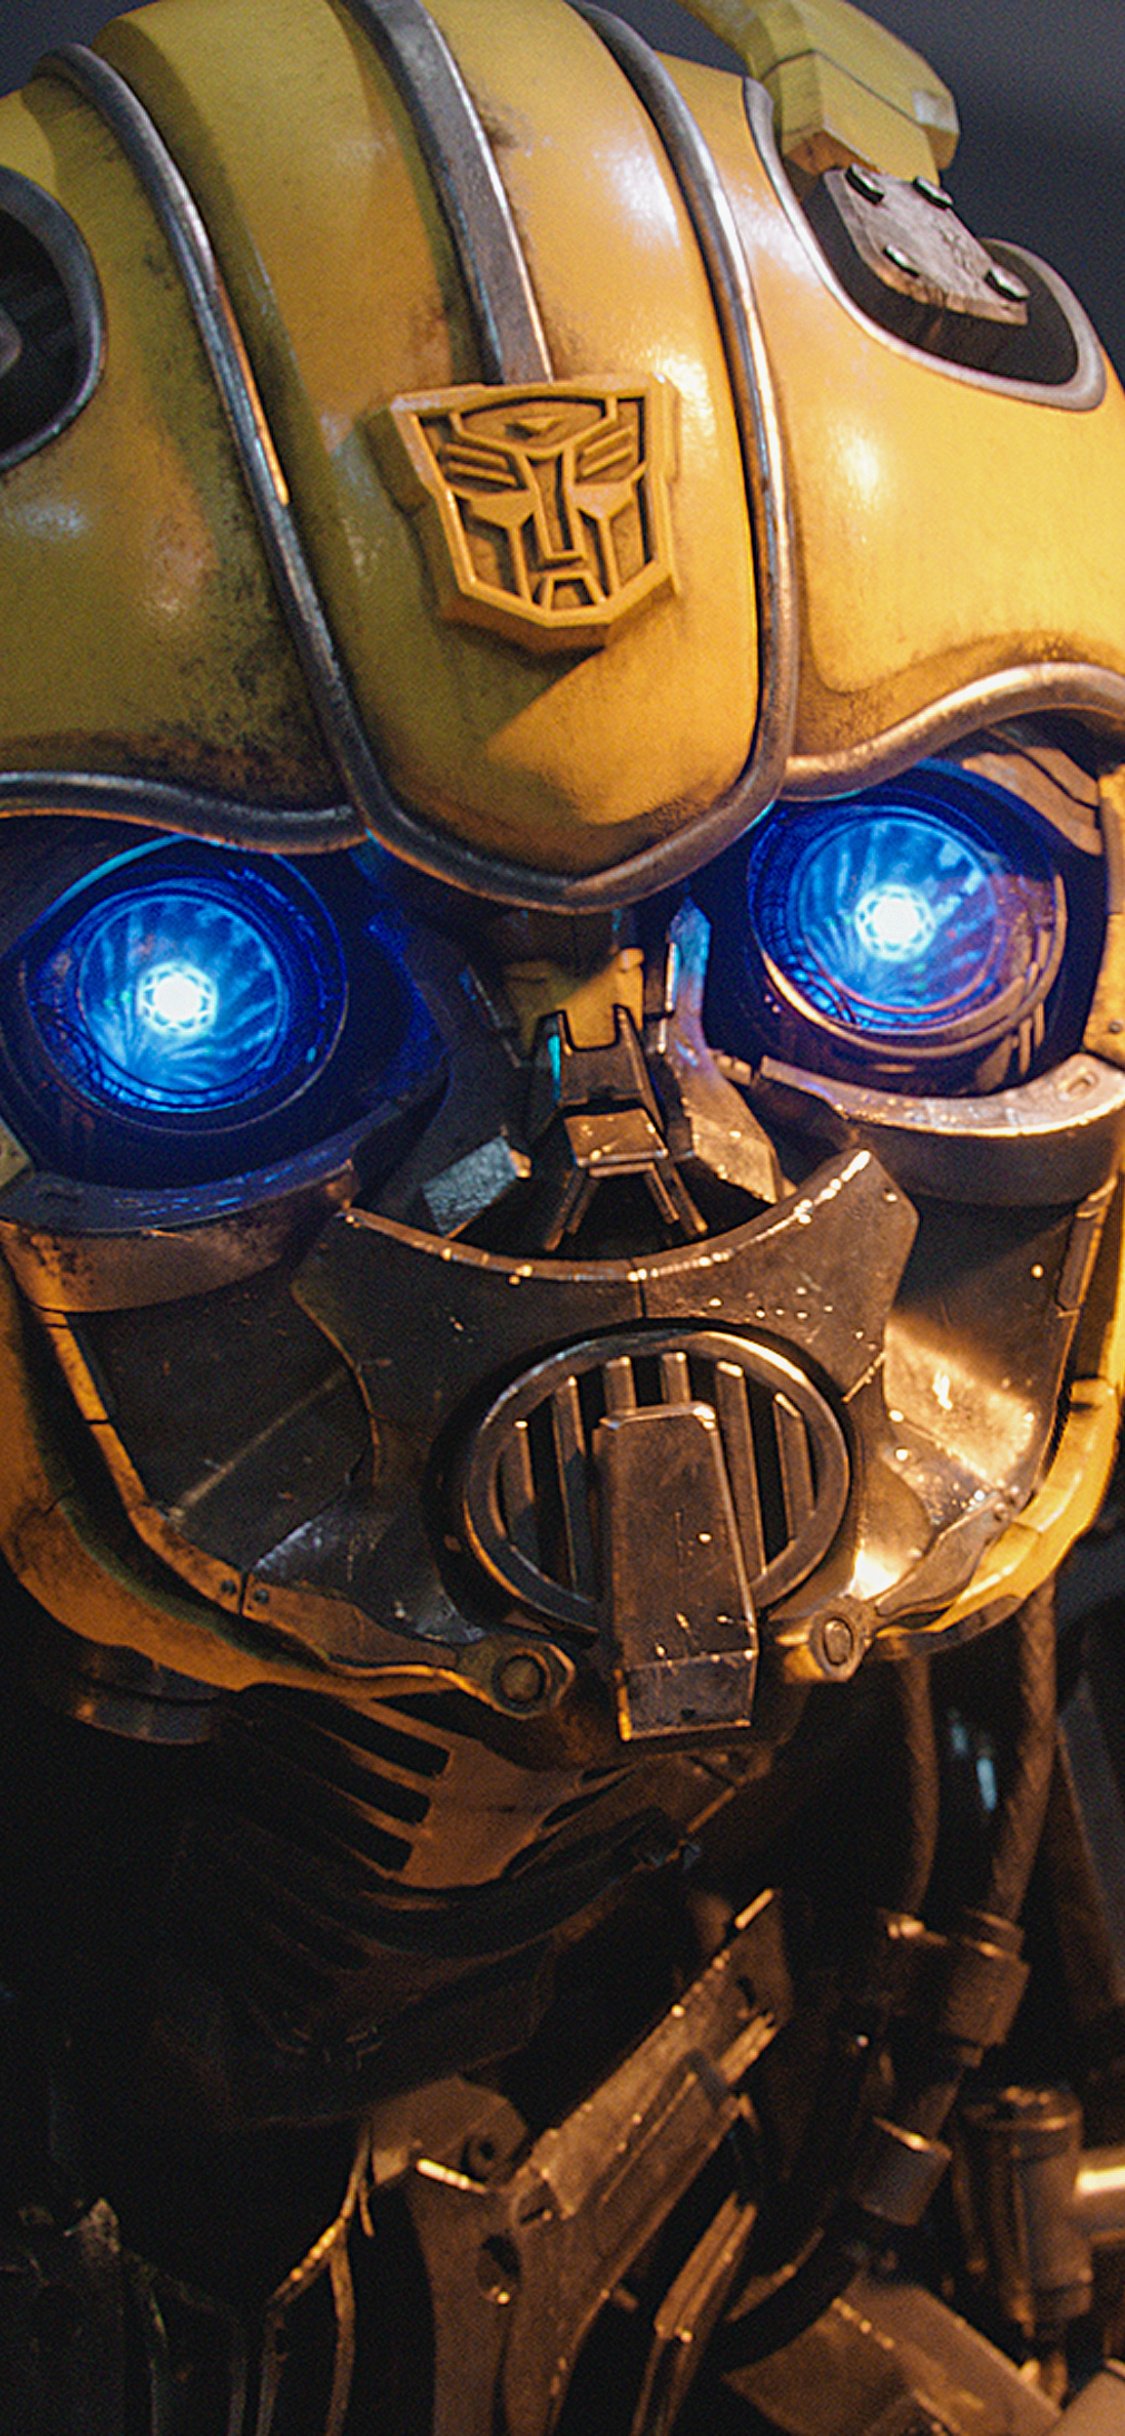 Bumblebee 2018 4k iPhone XS, iPhone iPhone X HD 4k Wallpaper, Image, Background, Photo and Picture